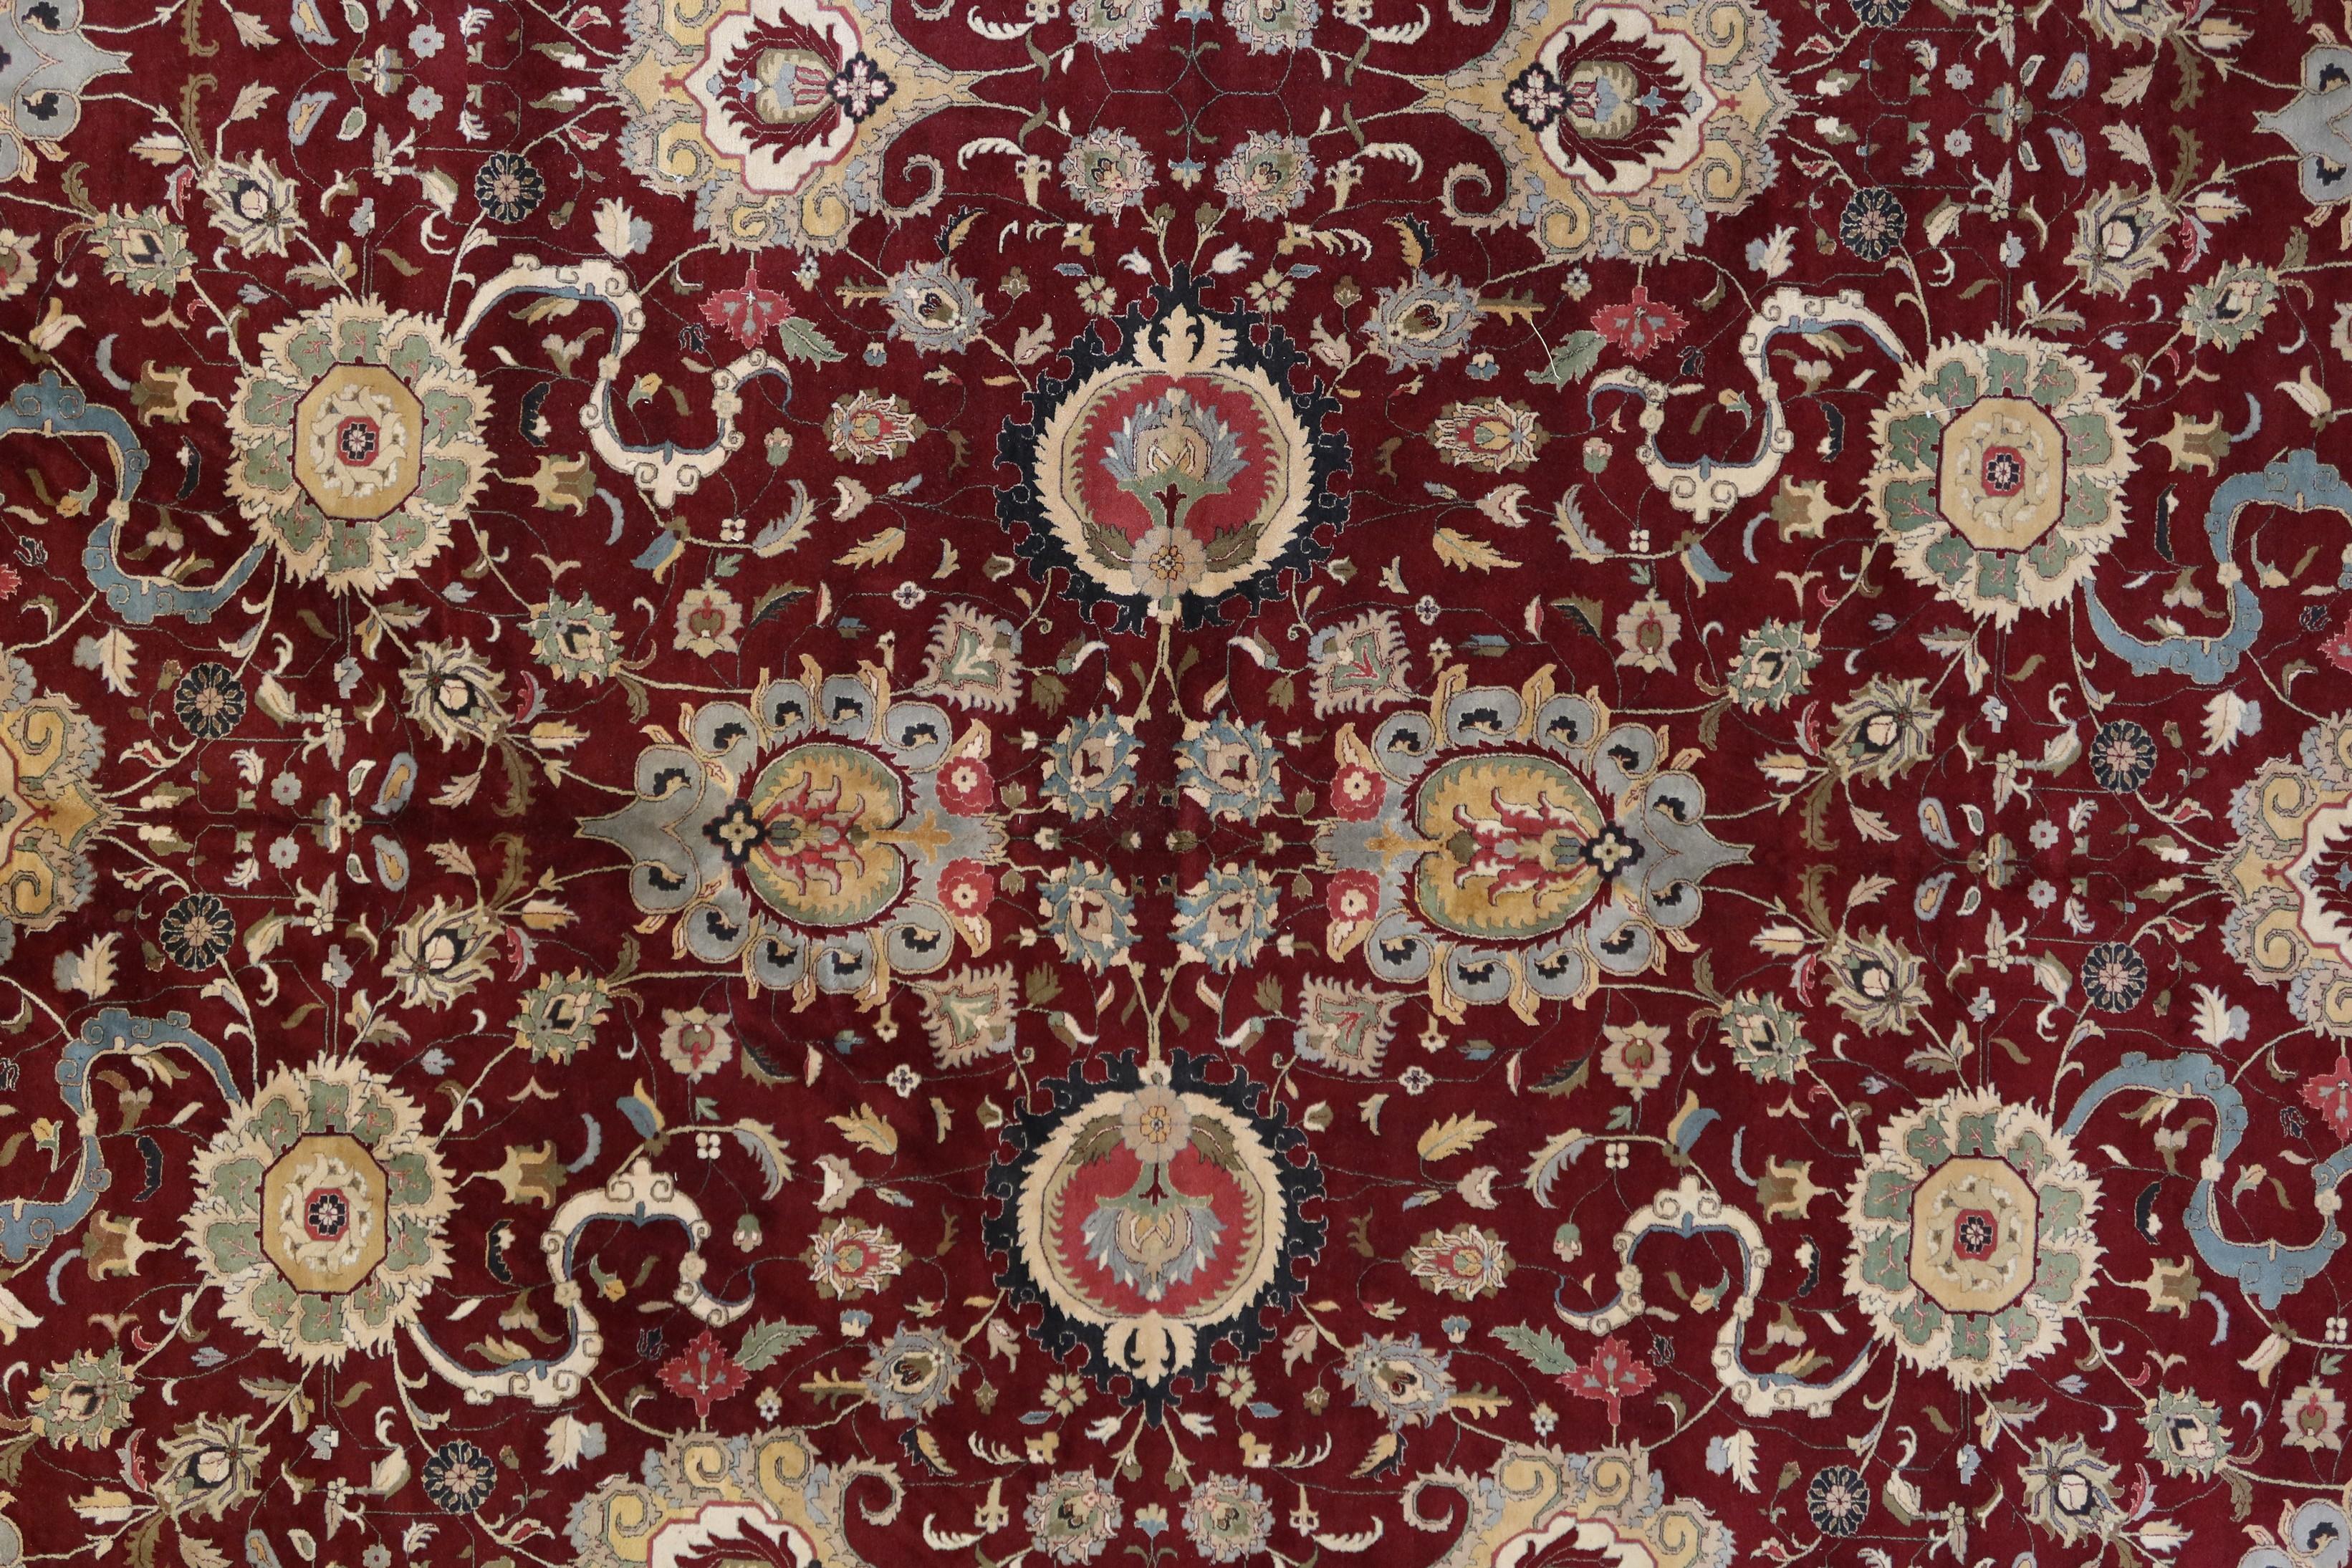 The Woven Arts rug collection is a highly accurate recreation of the historical Agra rugs of the 18th century and 19th century. High quality New Zealand yarn is finely hand-knotted to create these luxury rugs that are unusually high performance. The